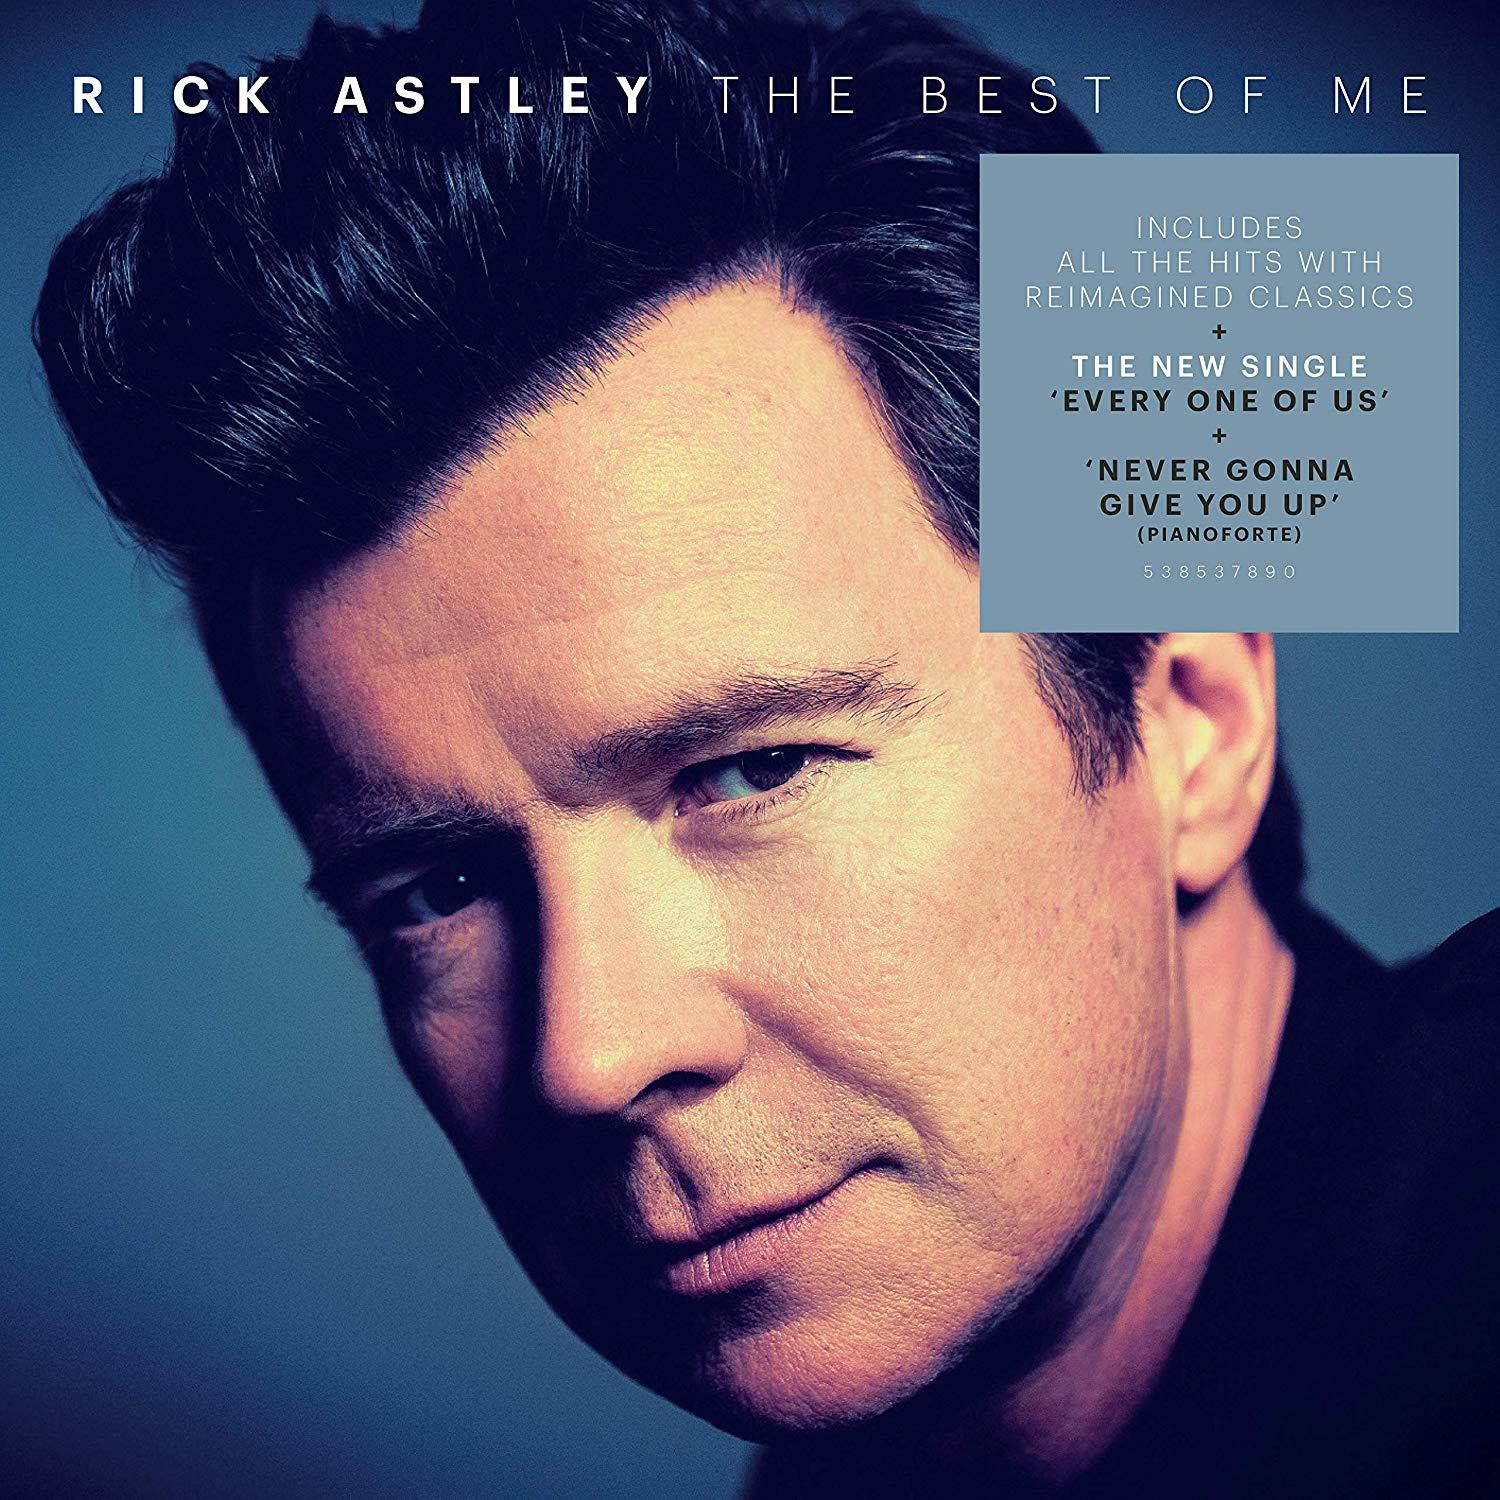 Astley Me (CD) - Edition) (Deluxe - Best Of Rick The